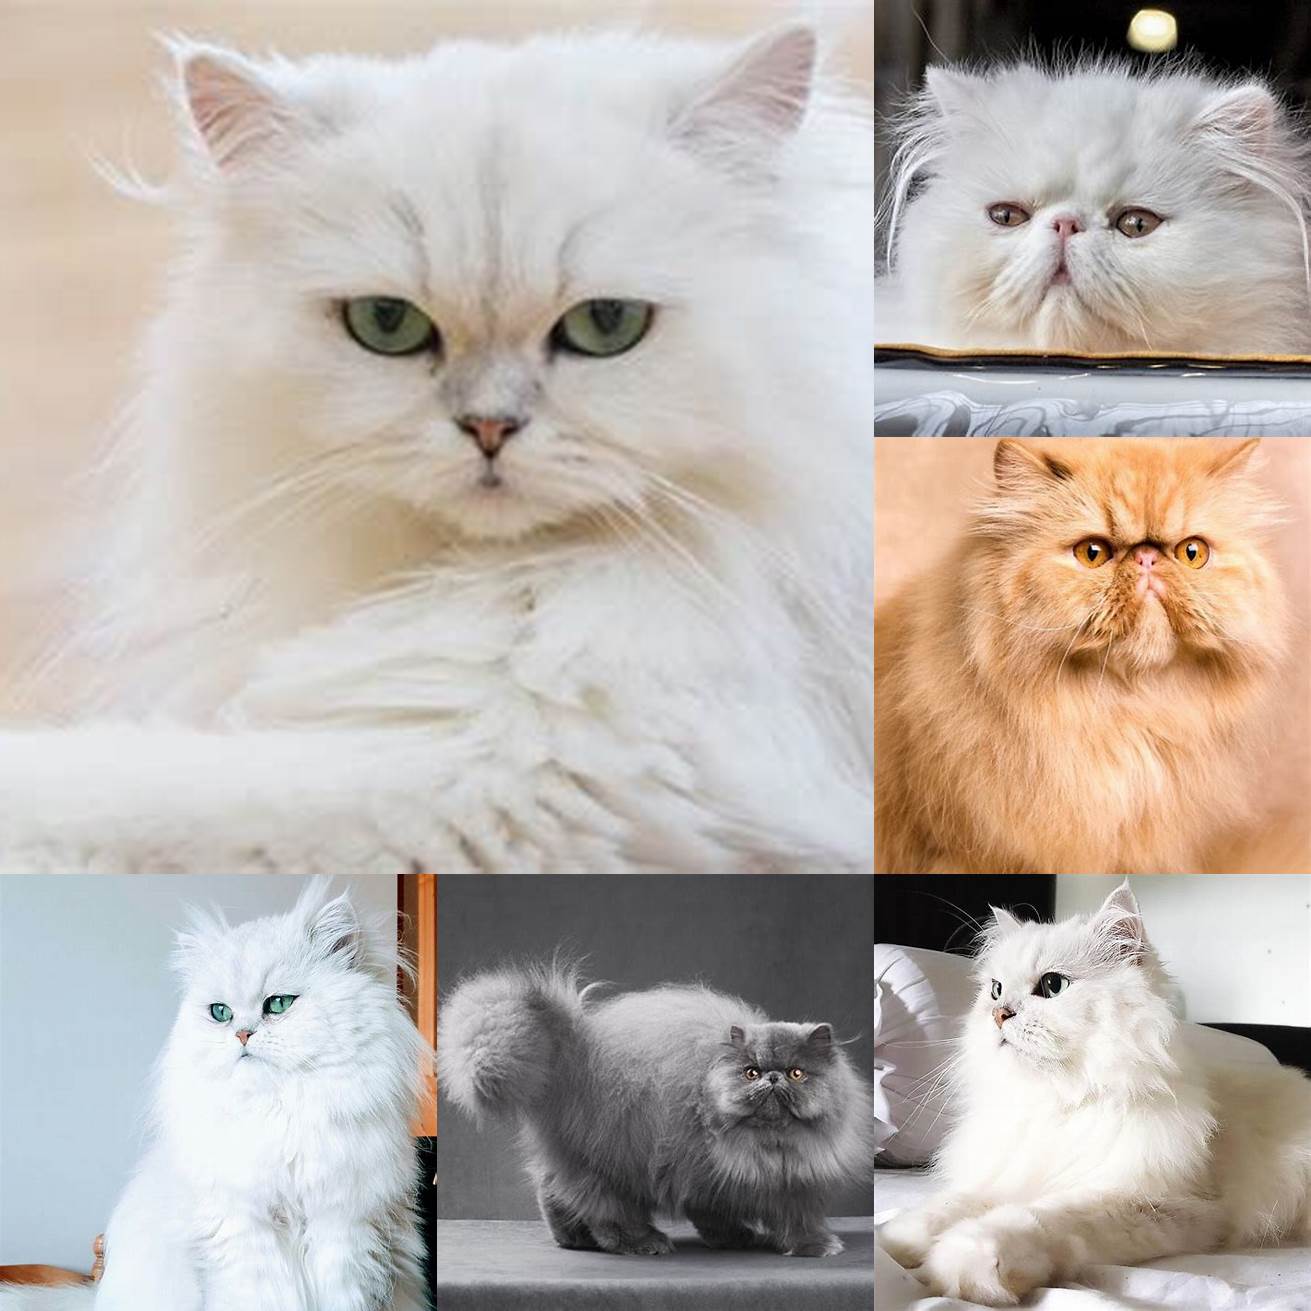 Persian cats are known for their calm and relaxed personalities